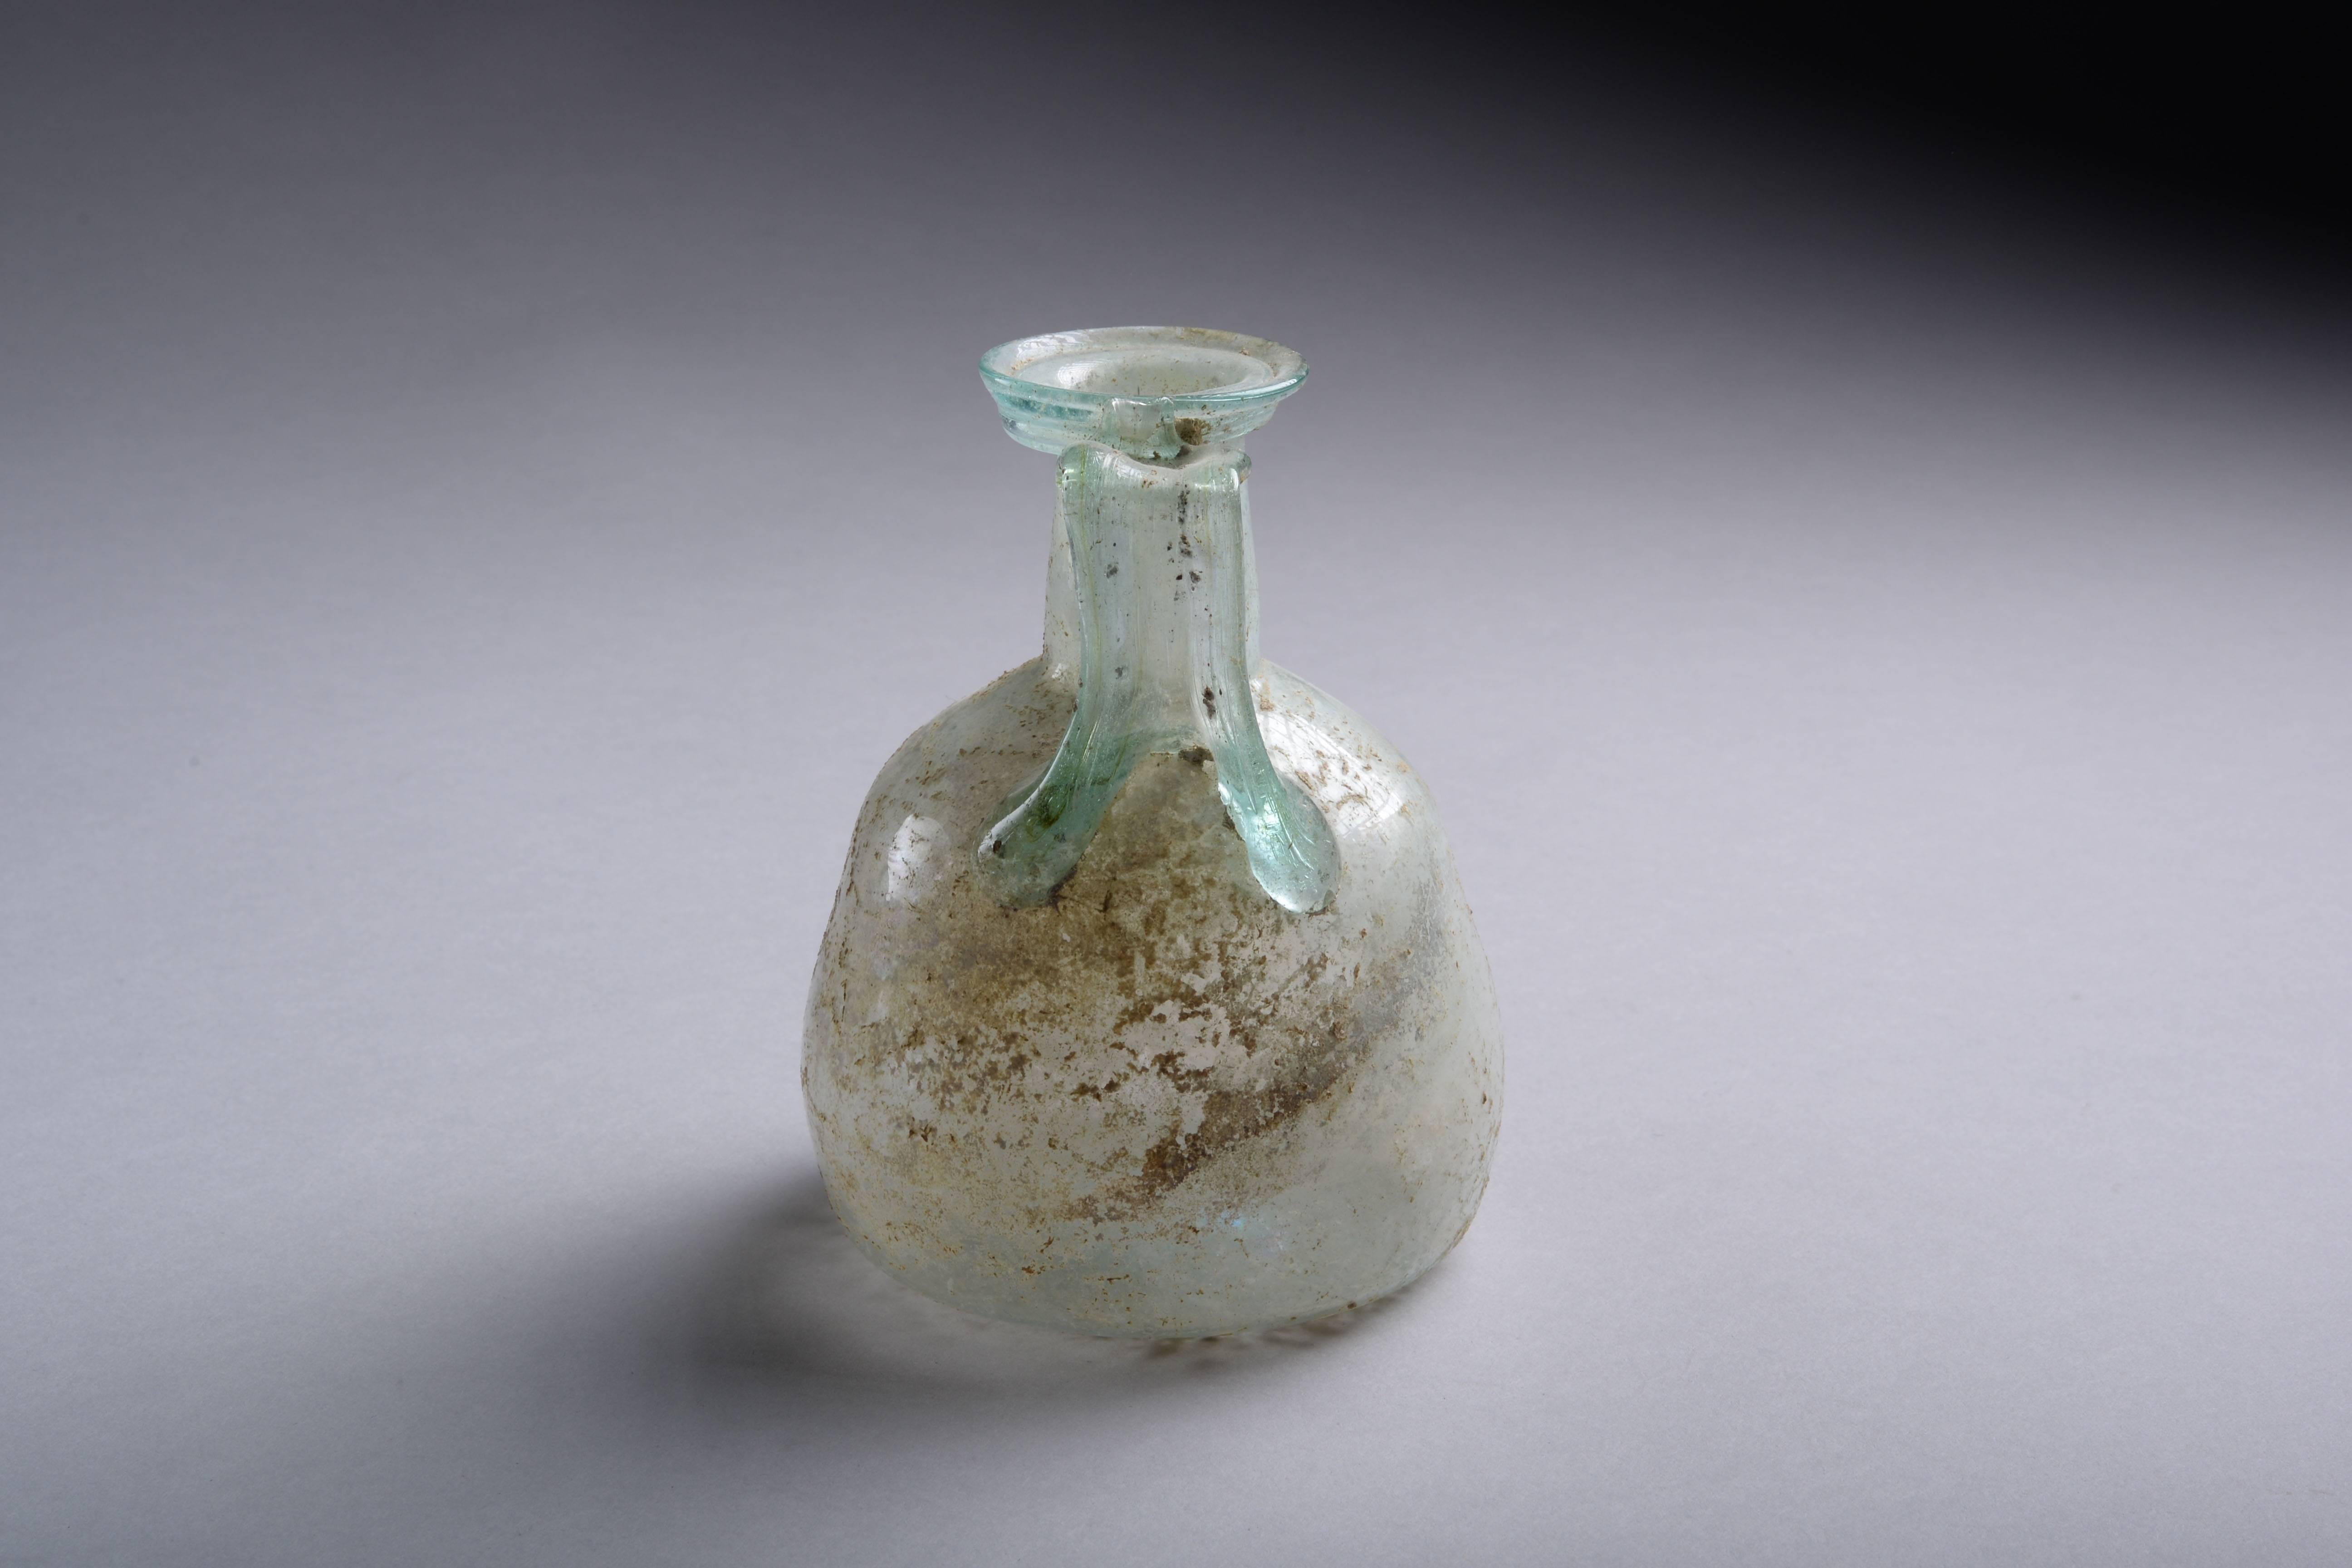 A fine and beautifully preserved Roman glass jug, dating to the first-second century AD.

Free blown, with rounded body, curved shoulders, cylindrical neck and round disc shaped mouth, with a separately applied trail handle, the base with remnants